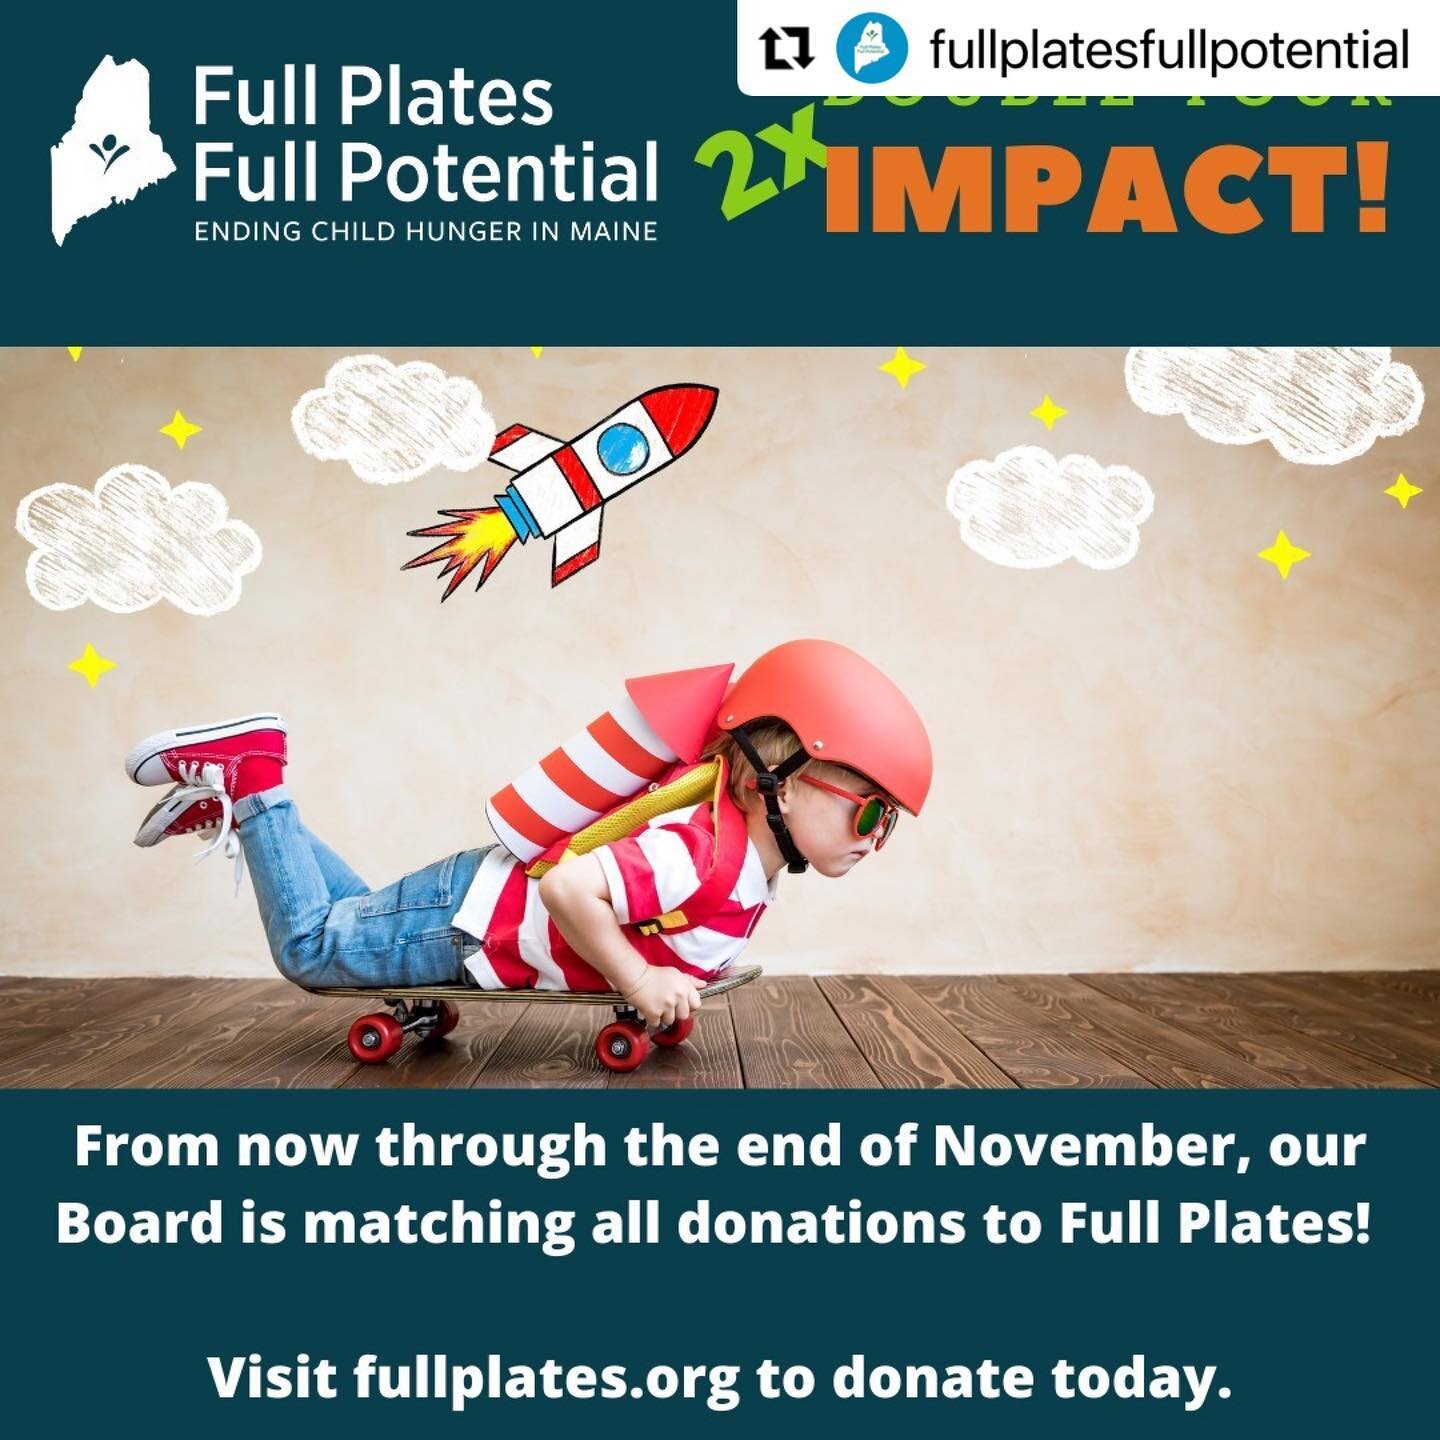 Molly is on the Board of Directors of @fullplatesfullpotential - an organization that is full of energetic and passionate people fighting to end childhood food insecurity in Maine. Please consider making a donation that will go the extra mile with a 